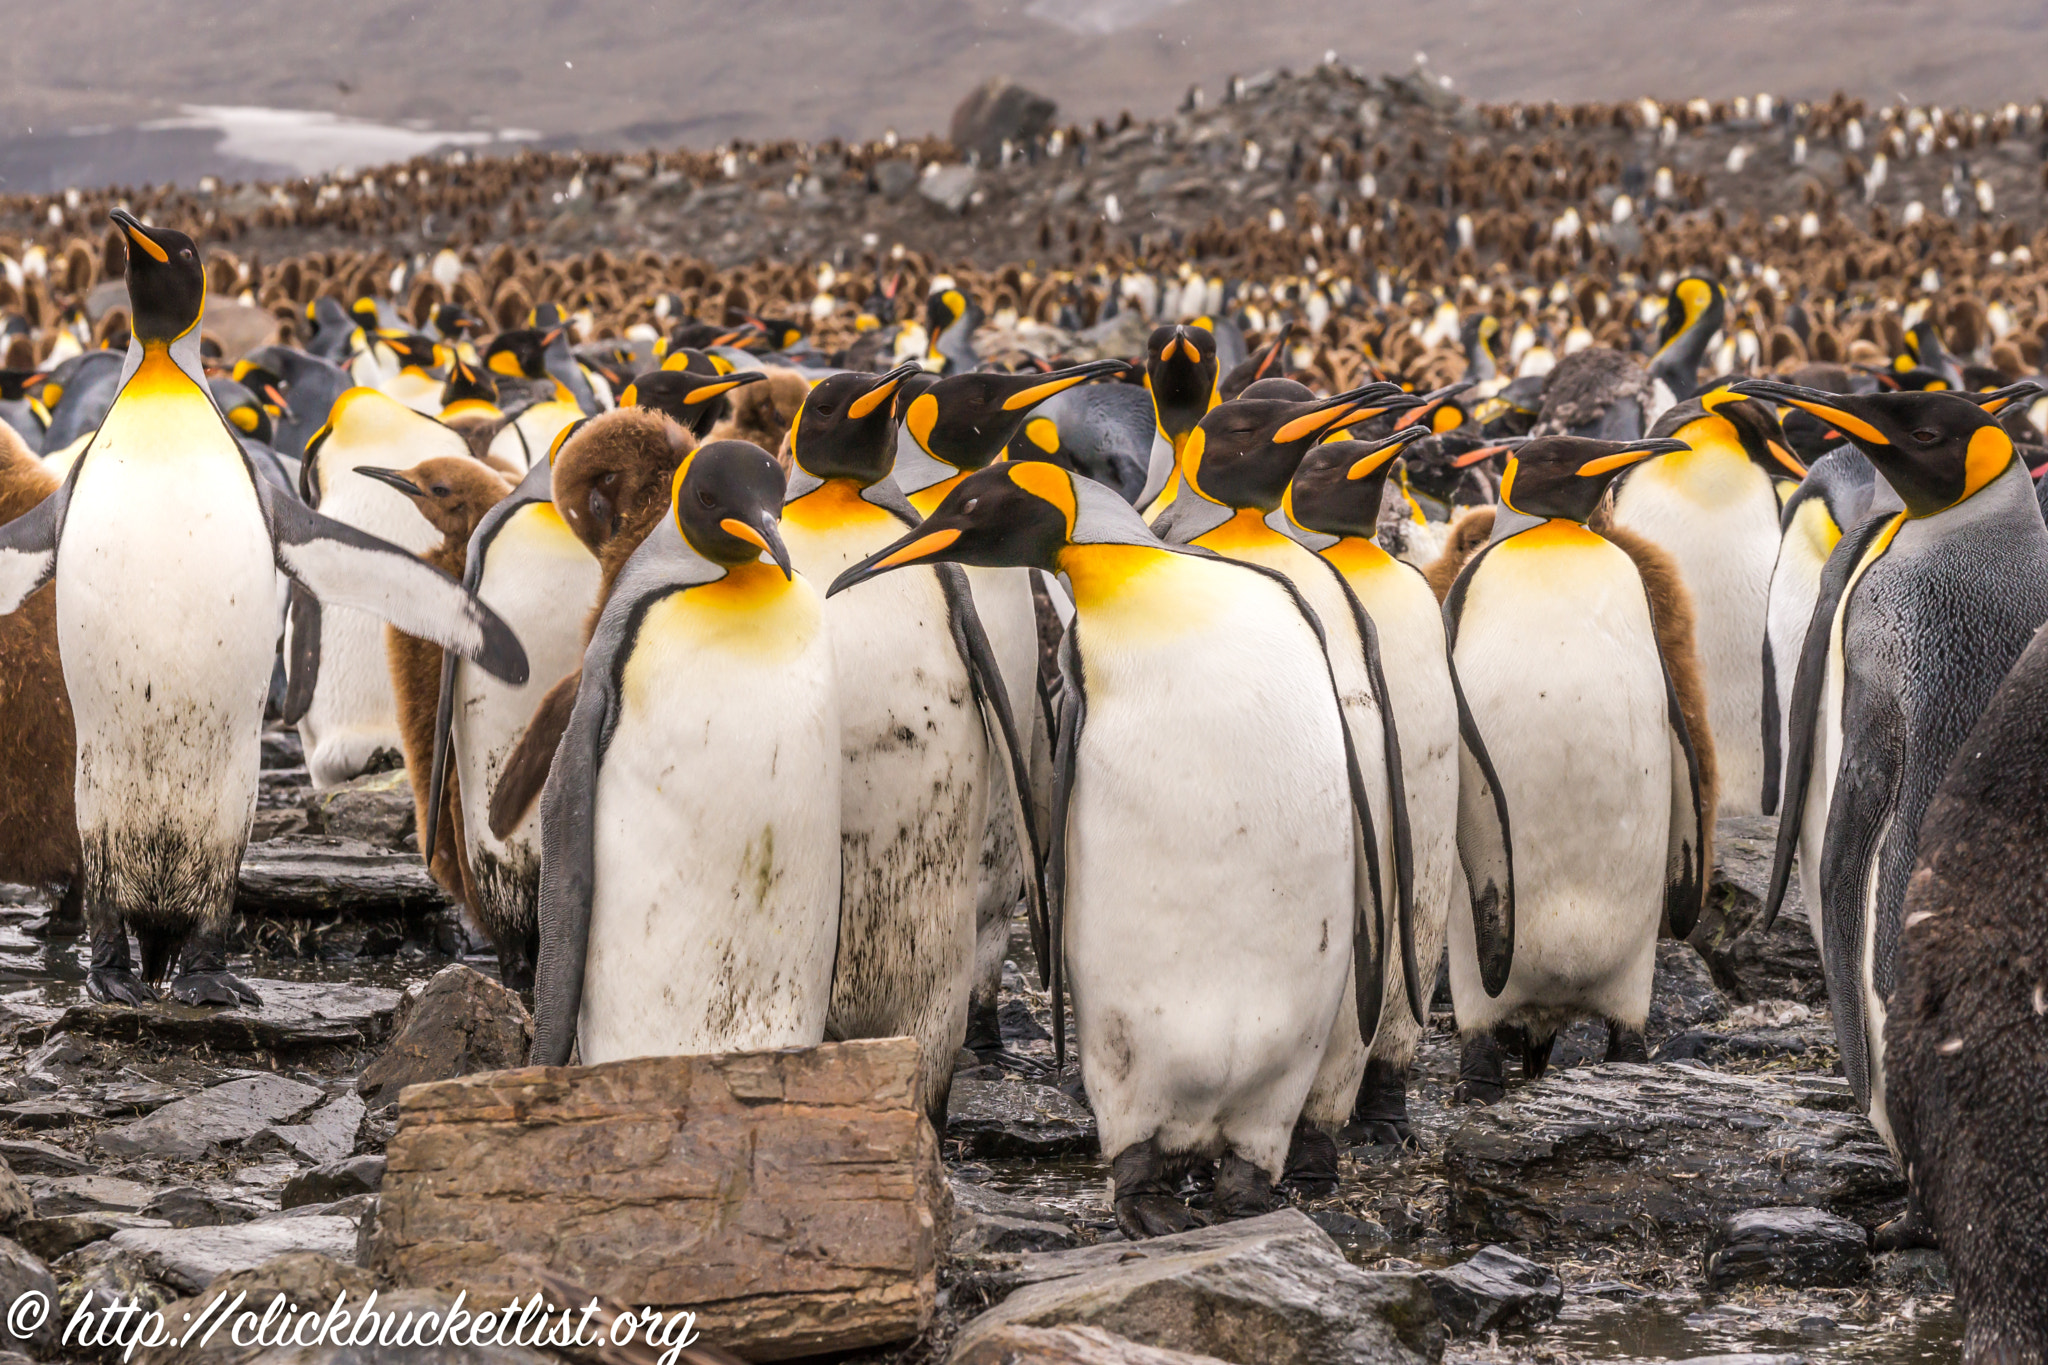 Sony a99 II sample photo. A colony of king penguins photography